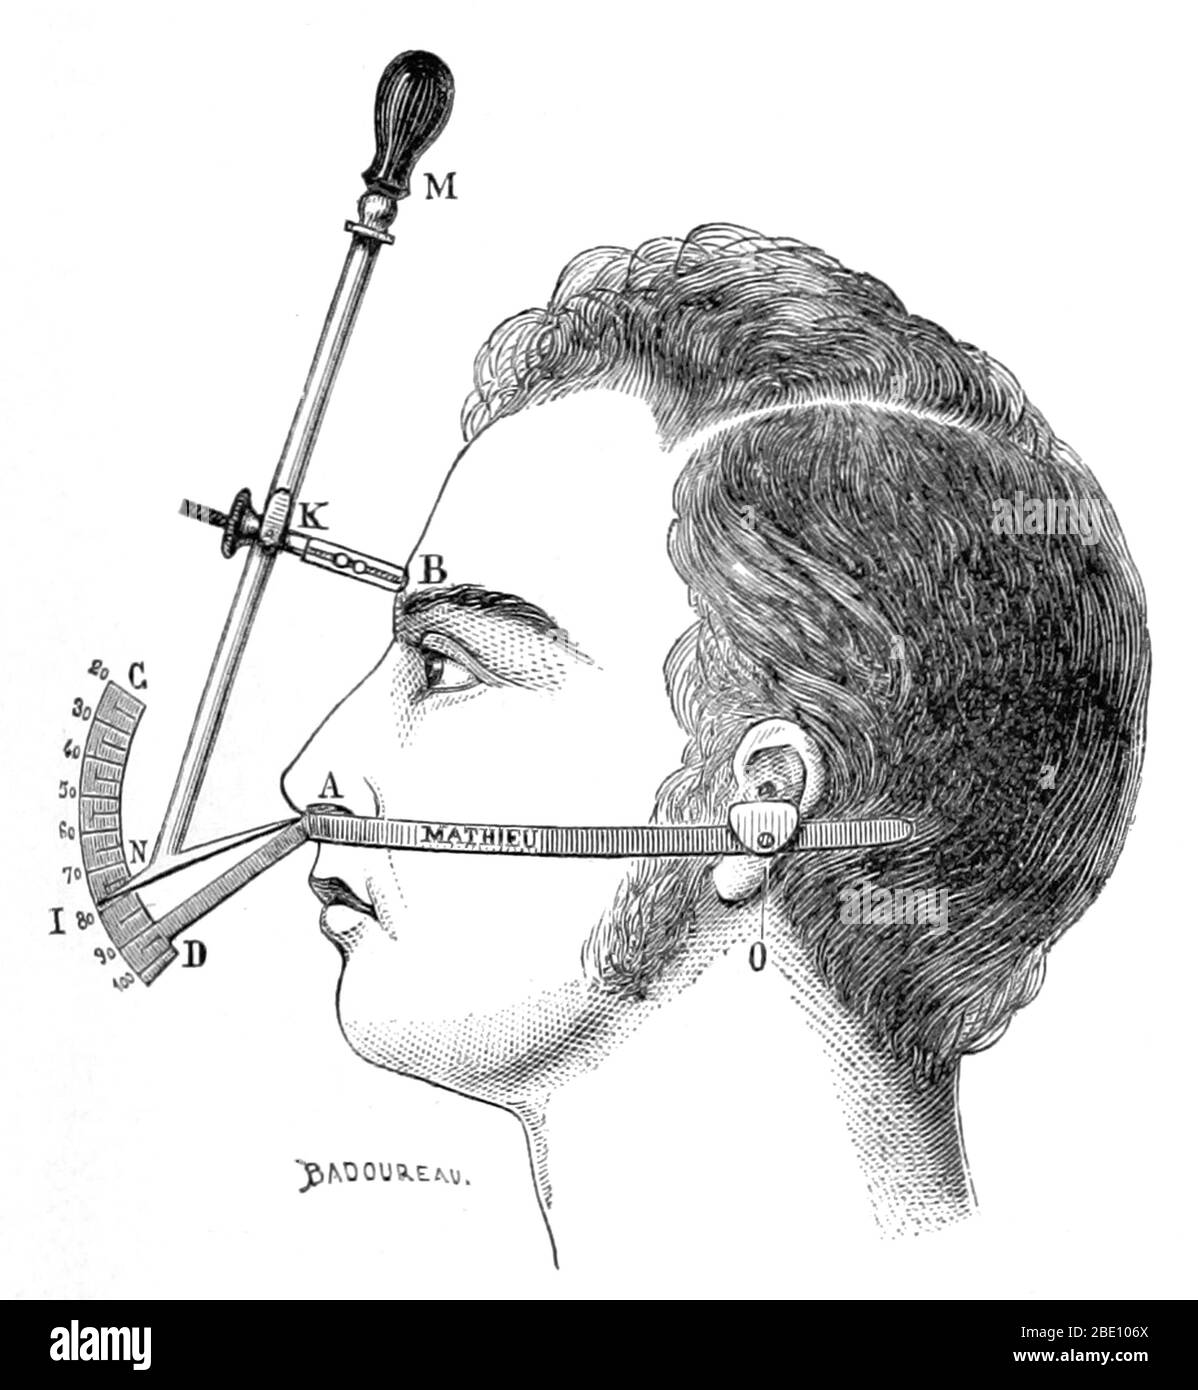 An illustration from 'Dictionnaire des sciences anthropologiques' (1883) published under the direction of Alphonse Bertillon, Coudereau, A. Hovelacque, Issaurat, and others. Alphonse Bertillon (1853-1914) was a French police officer and biometrics researcher who created anthropometry, an identification system based on physical measurements. Anthropometry was the first scientific system used by police to identify criminals. In this system the person was identified by measurement of the head and body, individual markings (tattoos, scars) and personality characteristics. Stock Photo